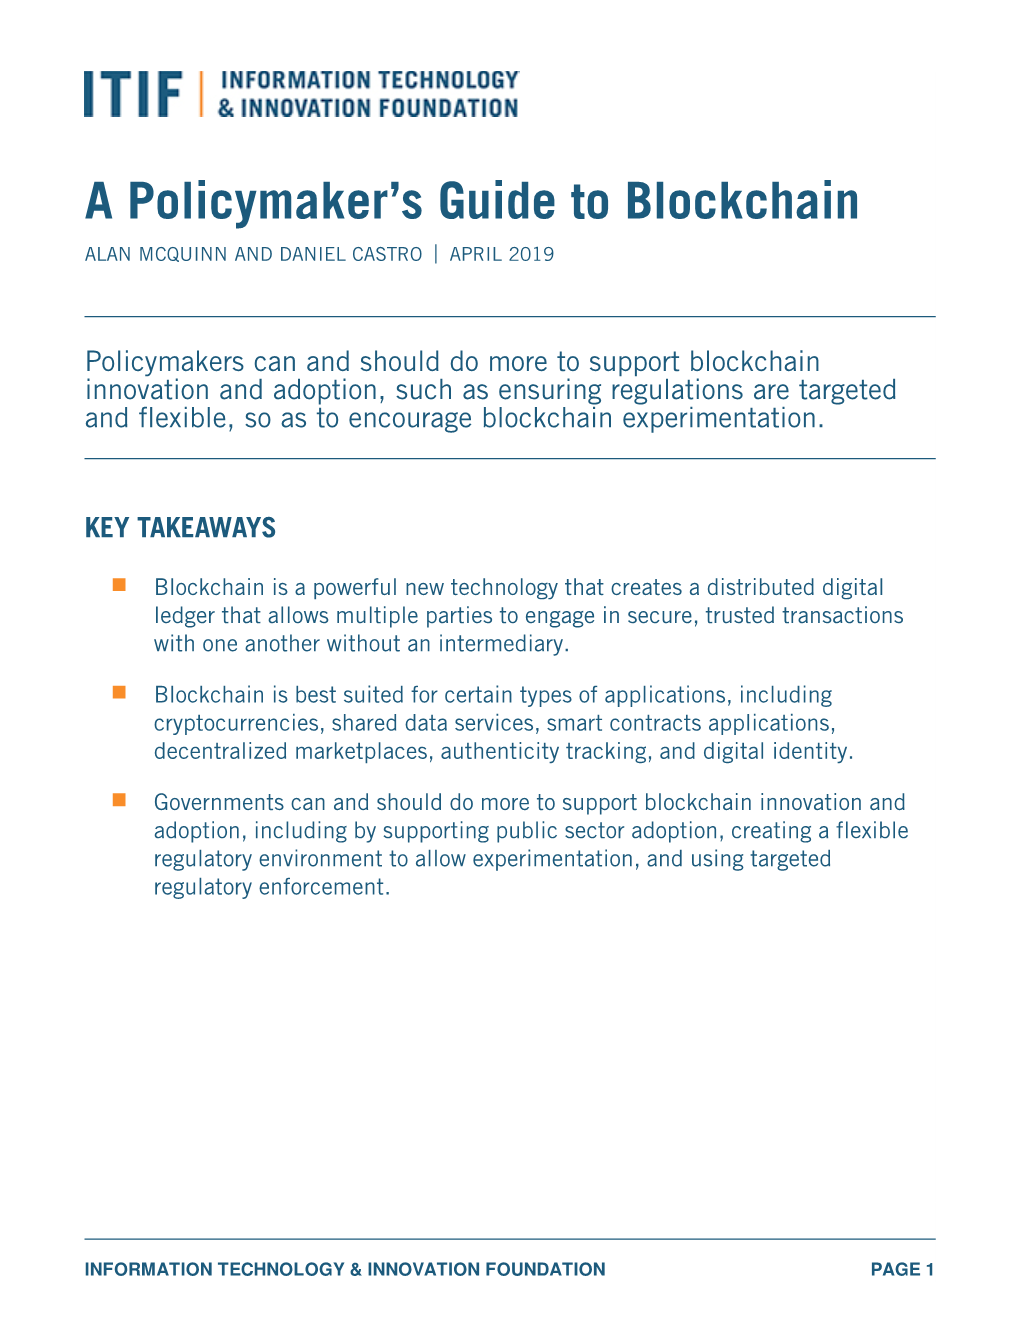 A Policymaker's Guide to Blockchain